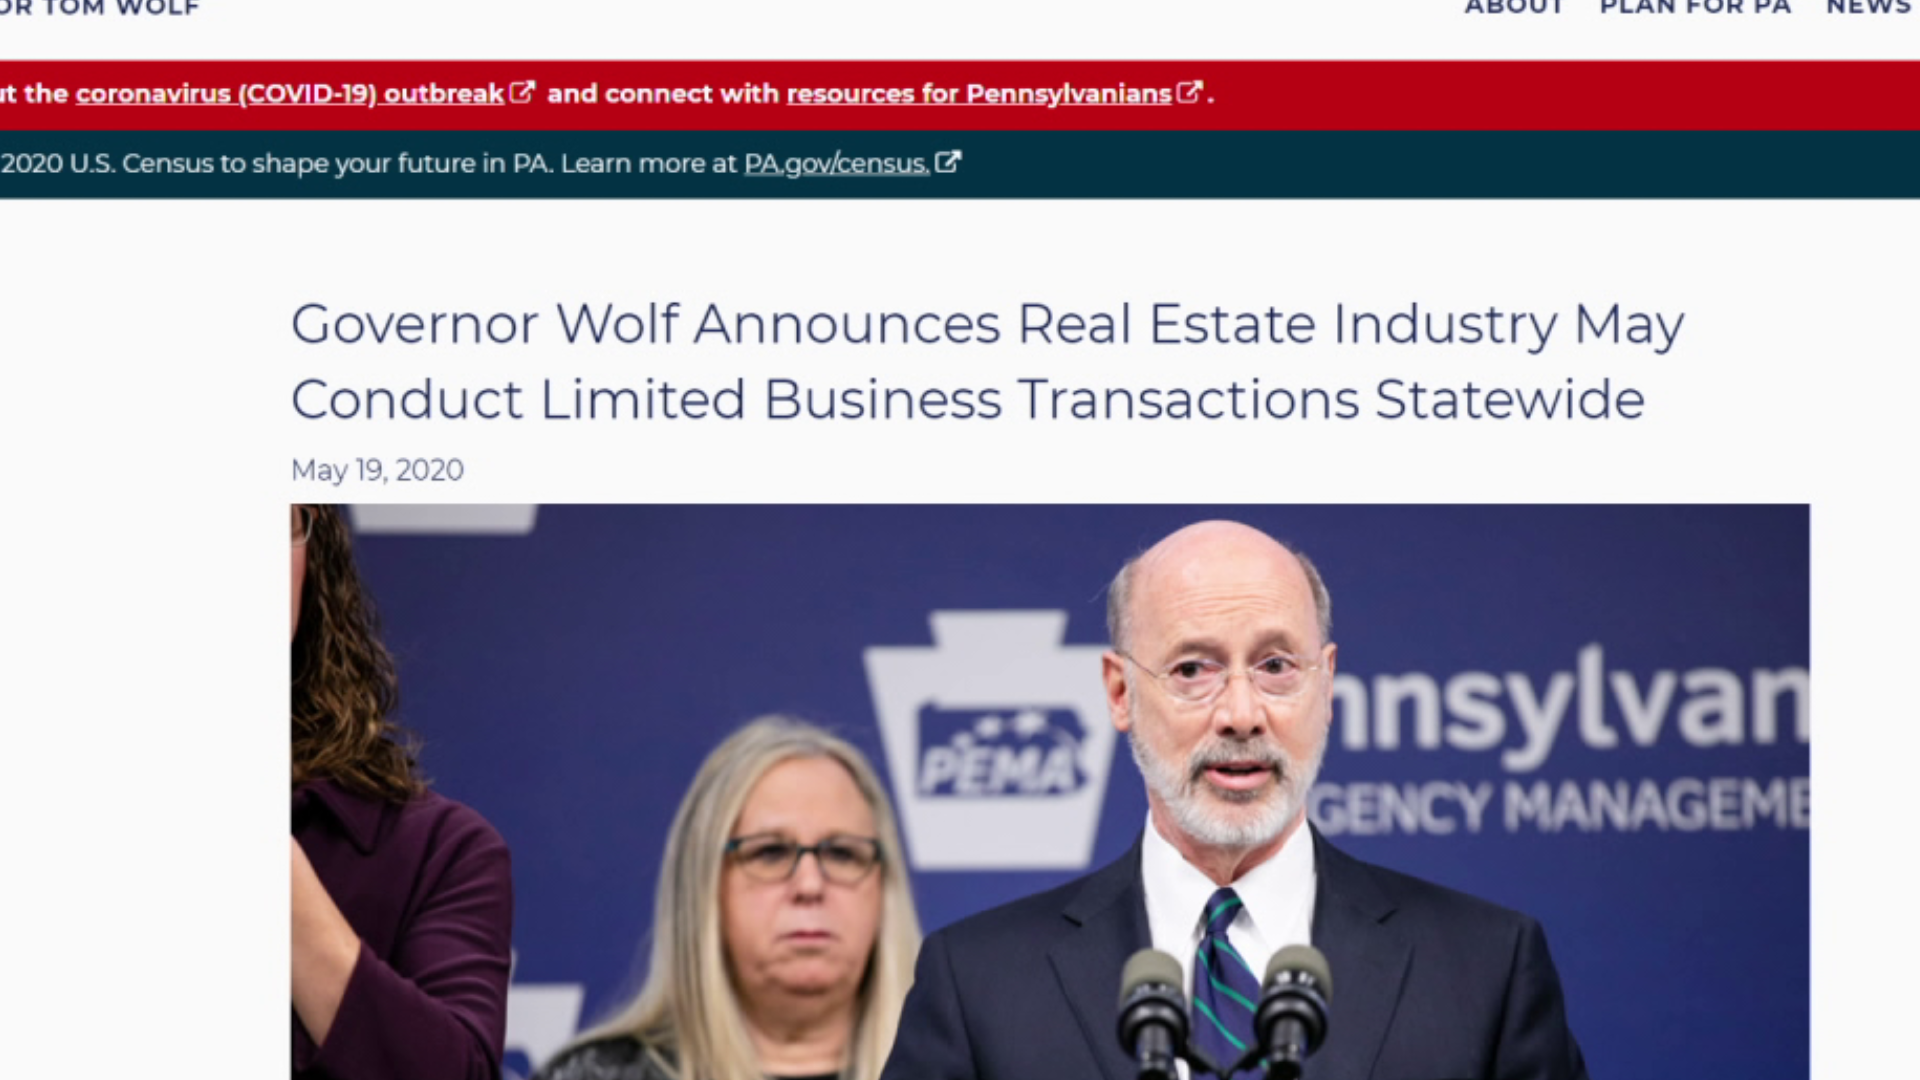 Governor Wolf announced that starting today, the real estate industry can conduct limited business statewide.